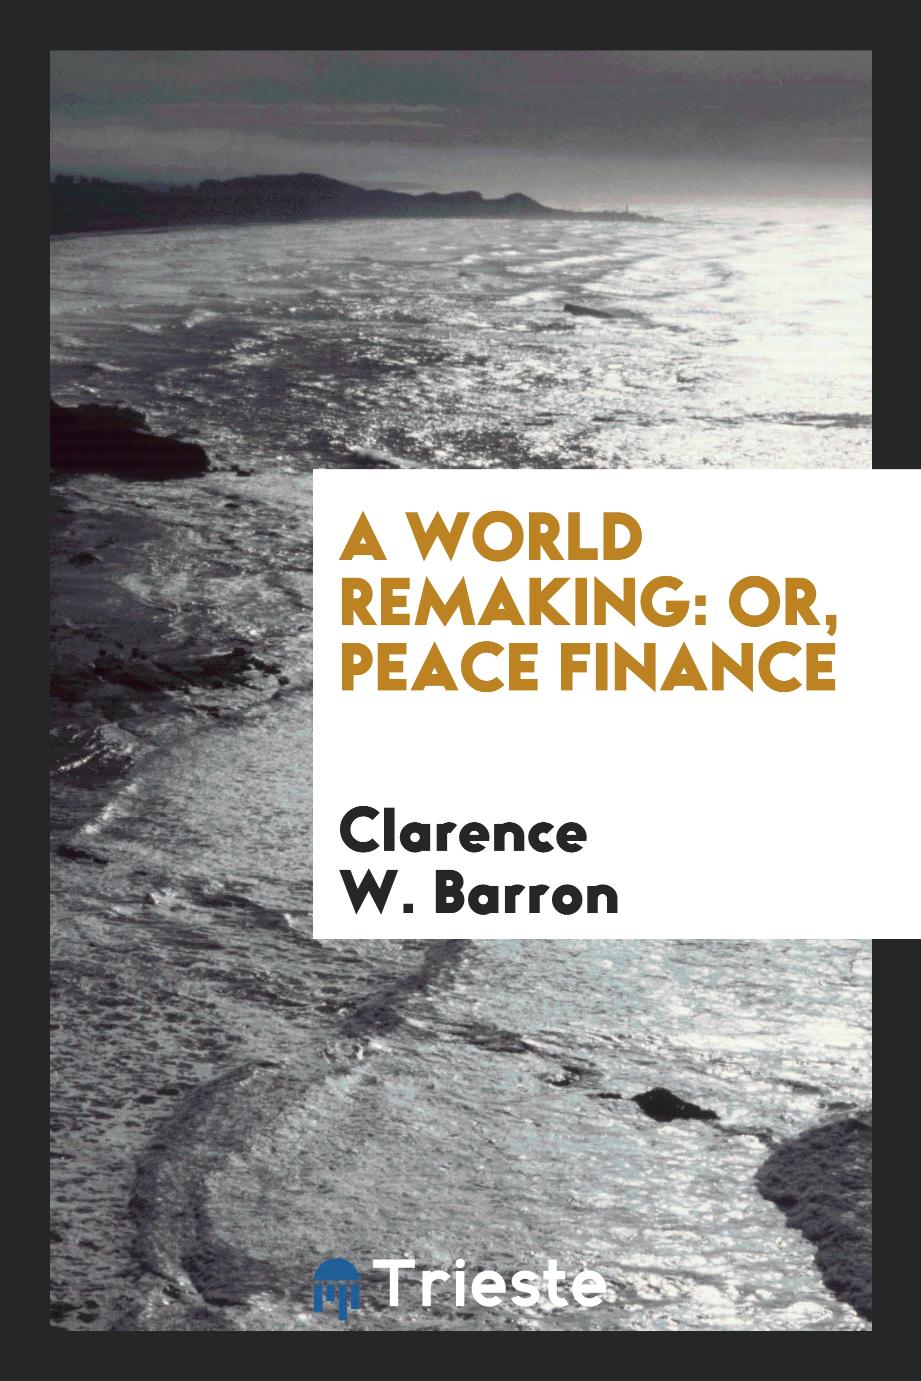 A World Remaking: Or, Peace Finance